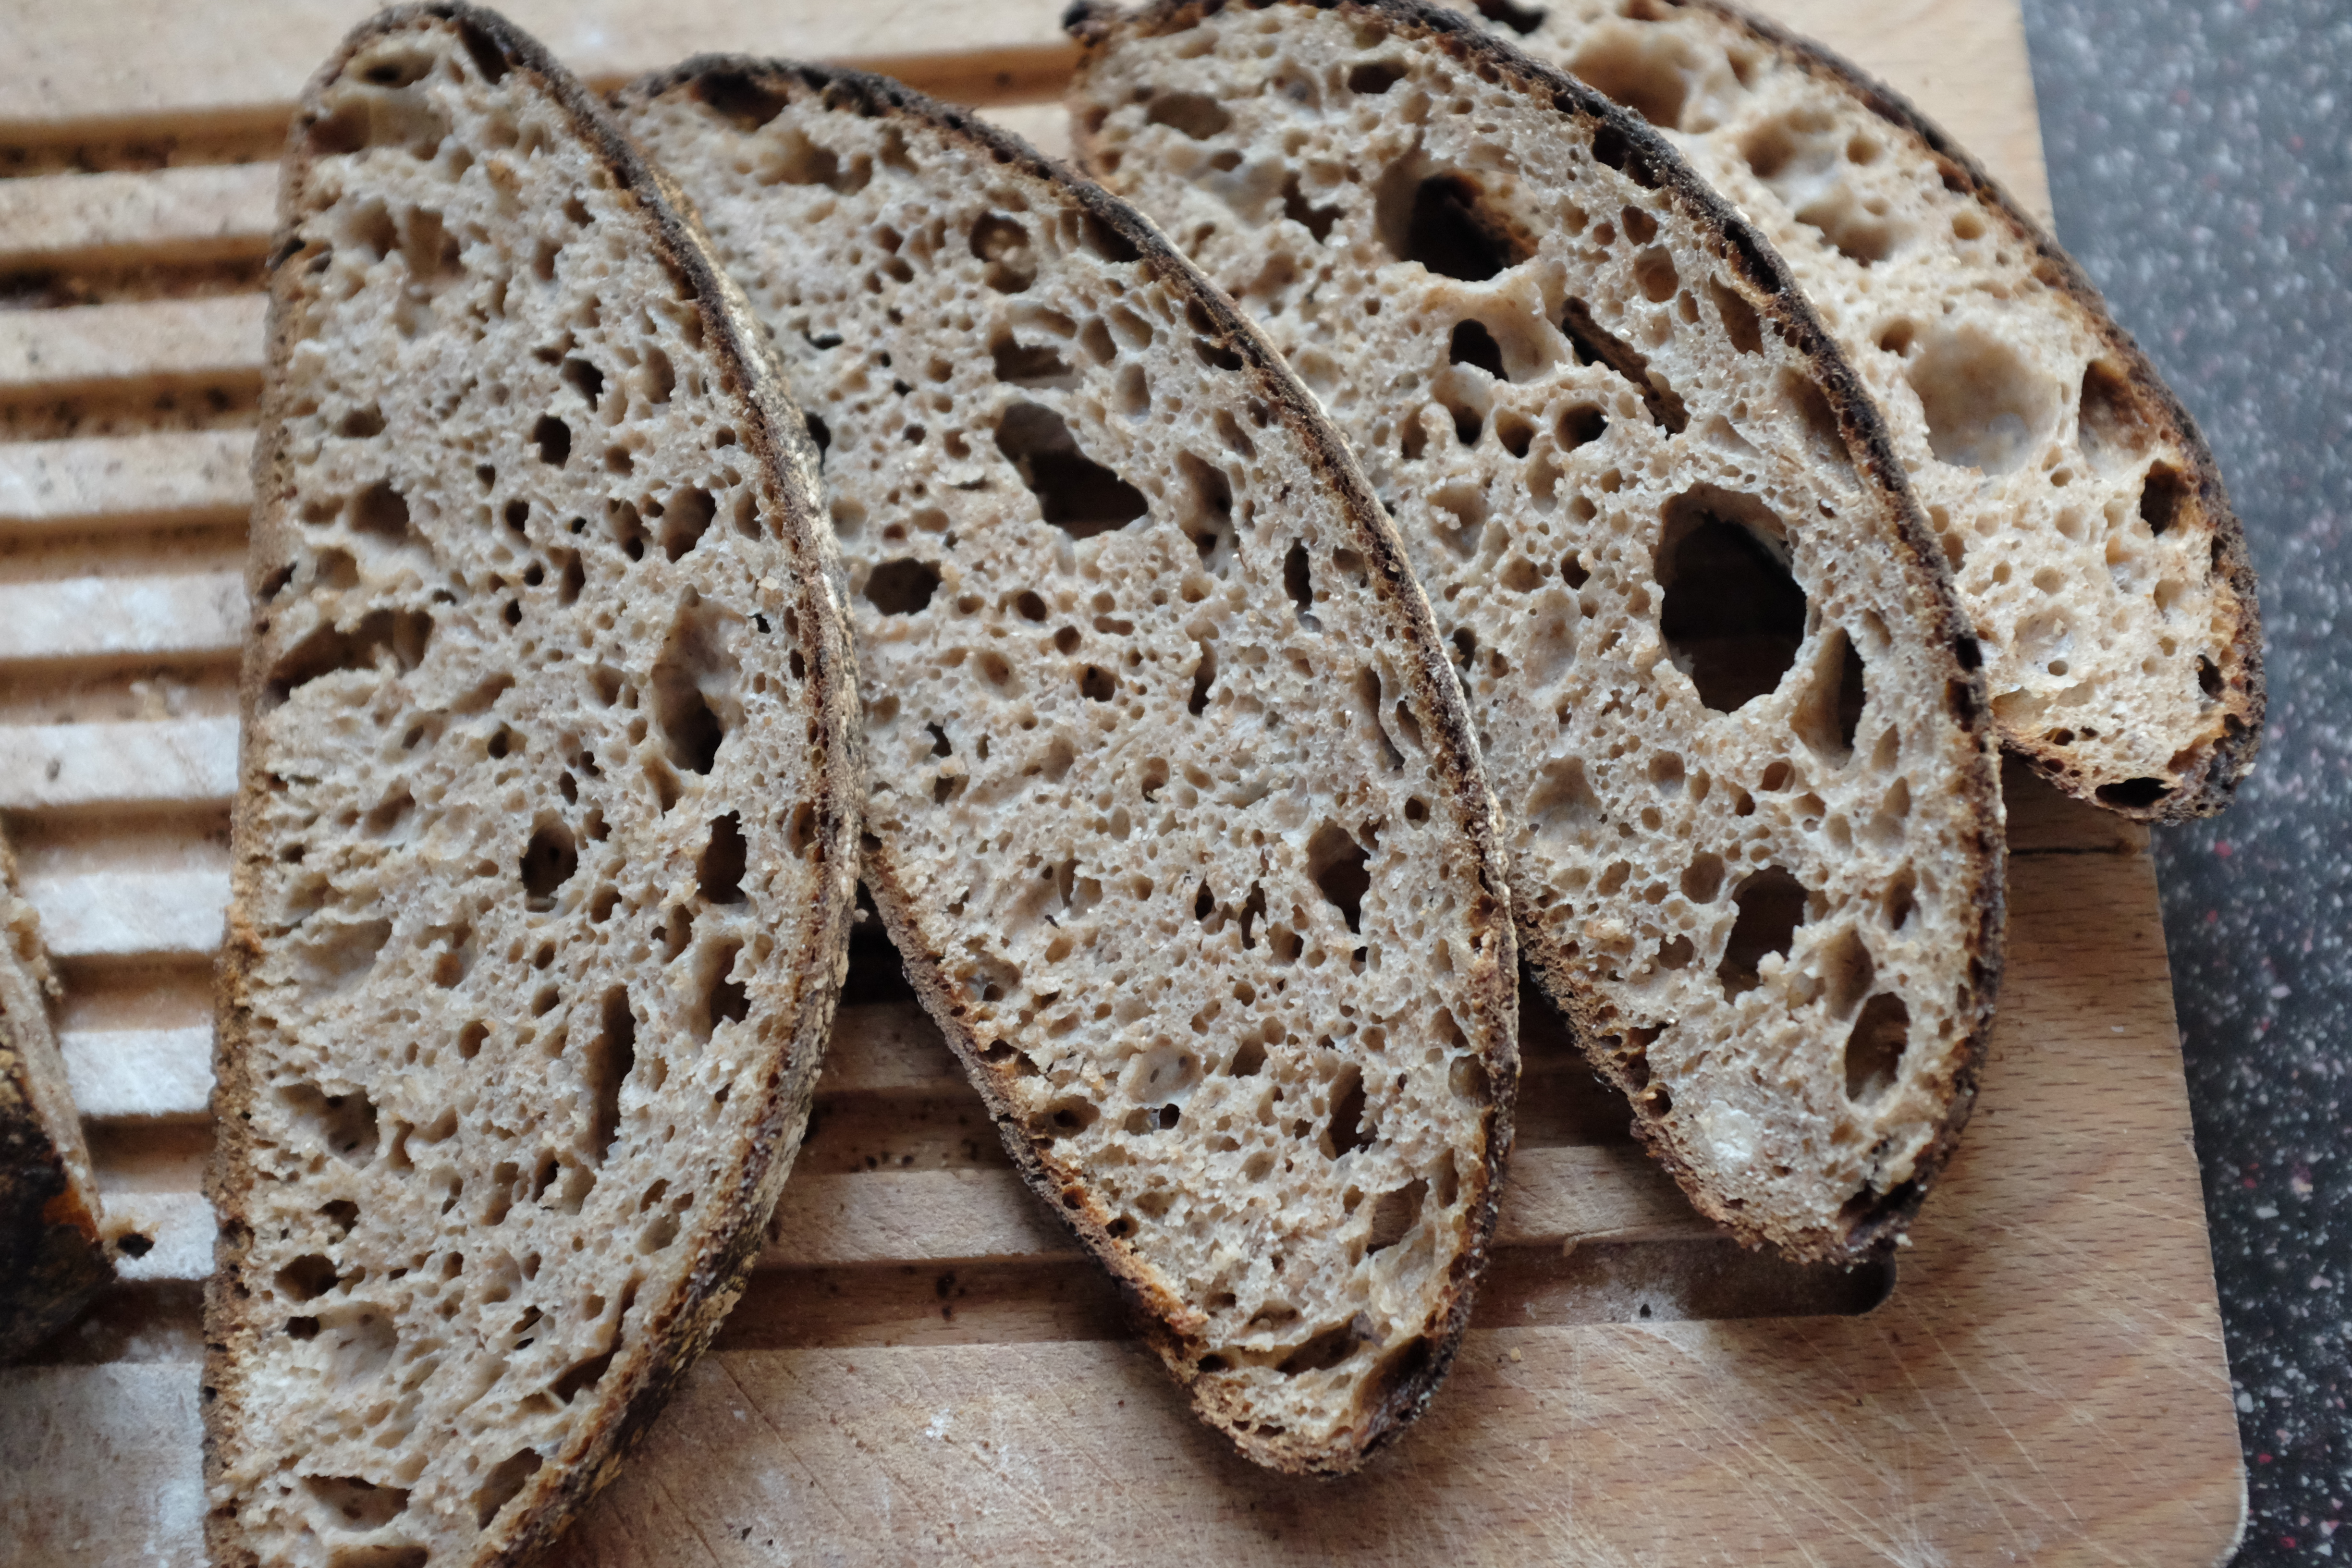 A close-up photograph of the crumb of the “Wholemeal Sourdough with a Splash of Rye” bread